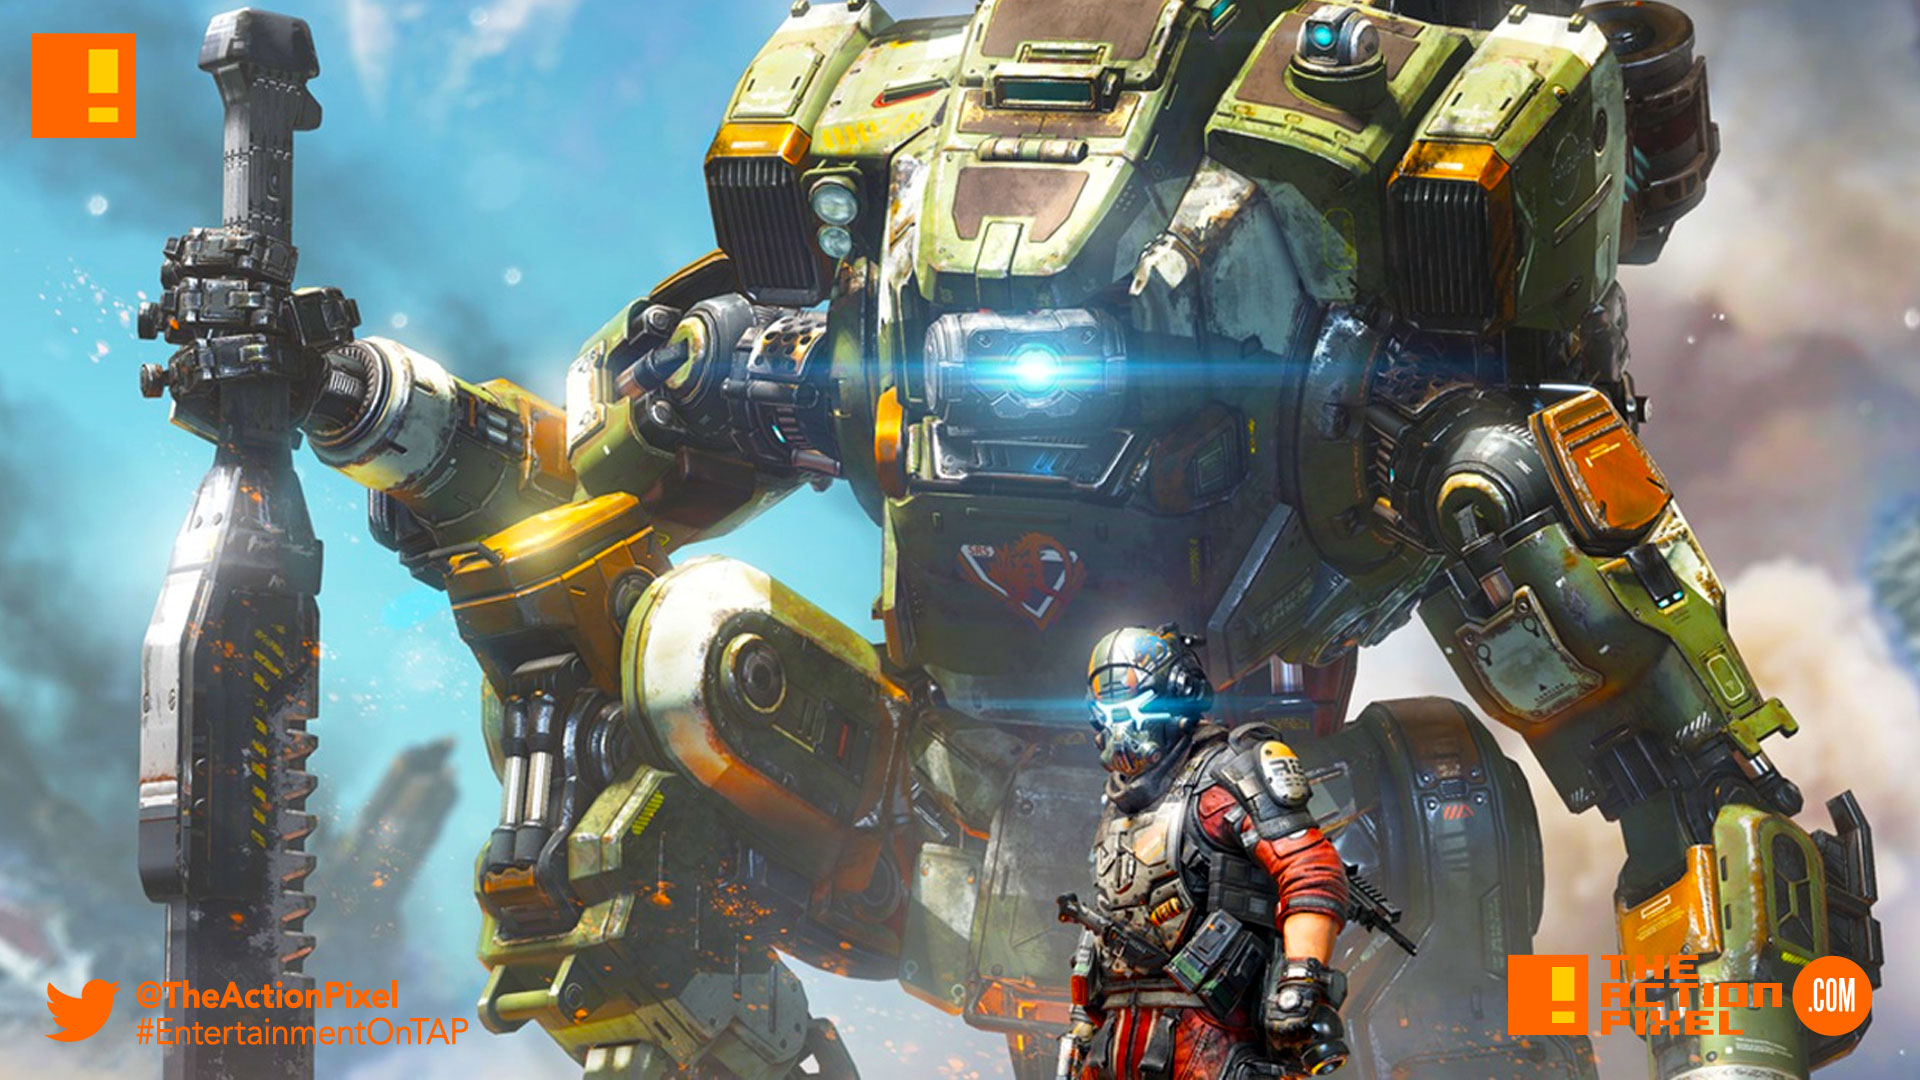 dlc, glitch in the frontier, titanfall 2, entertainment on tap, the action pixel,